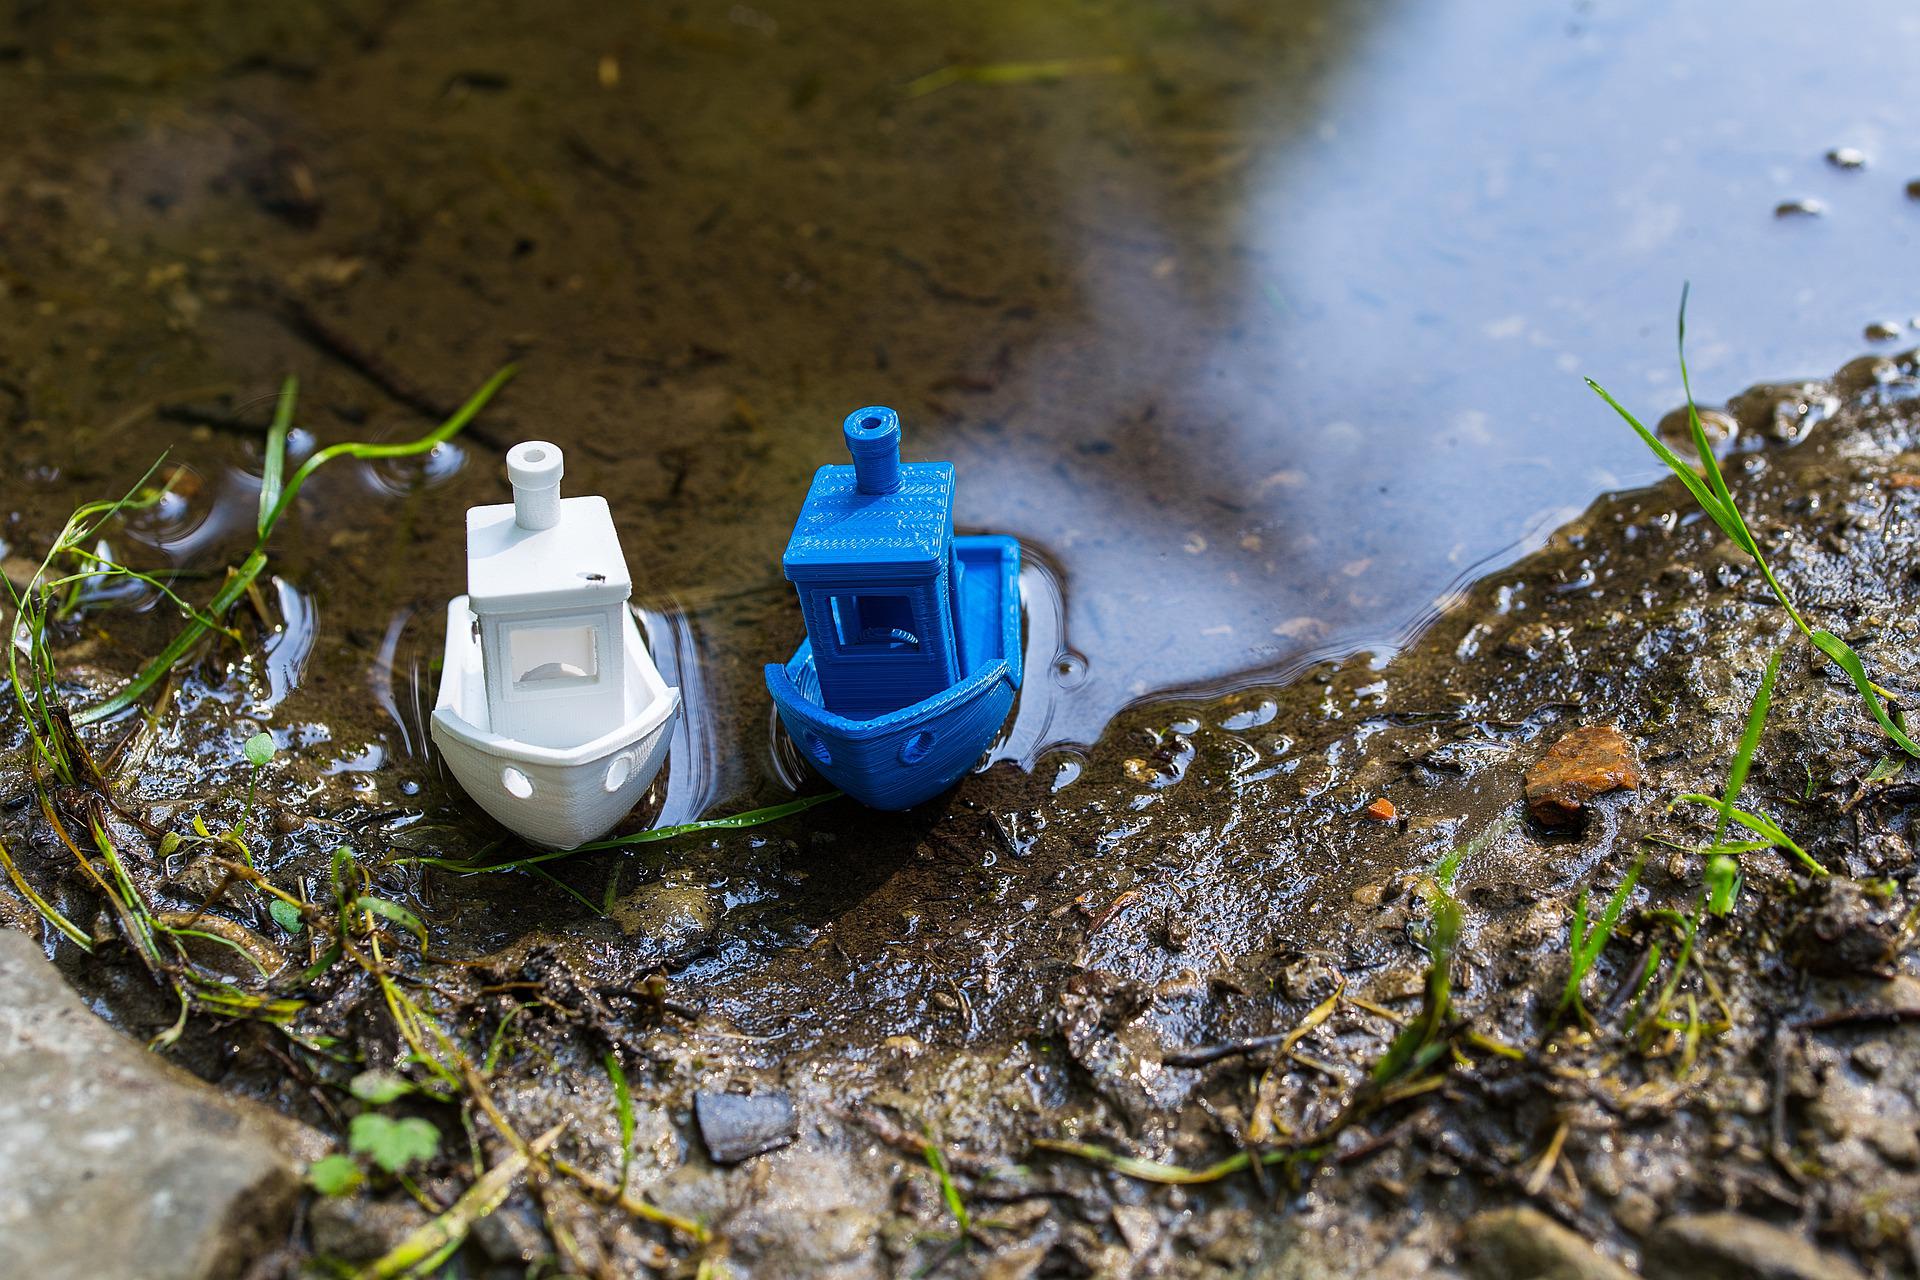 3D printed toy boats